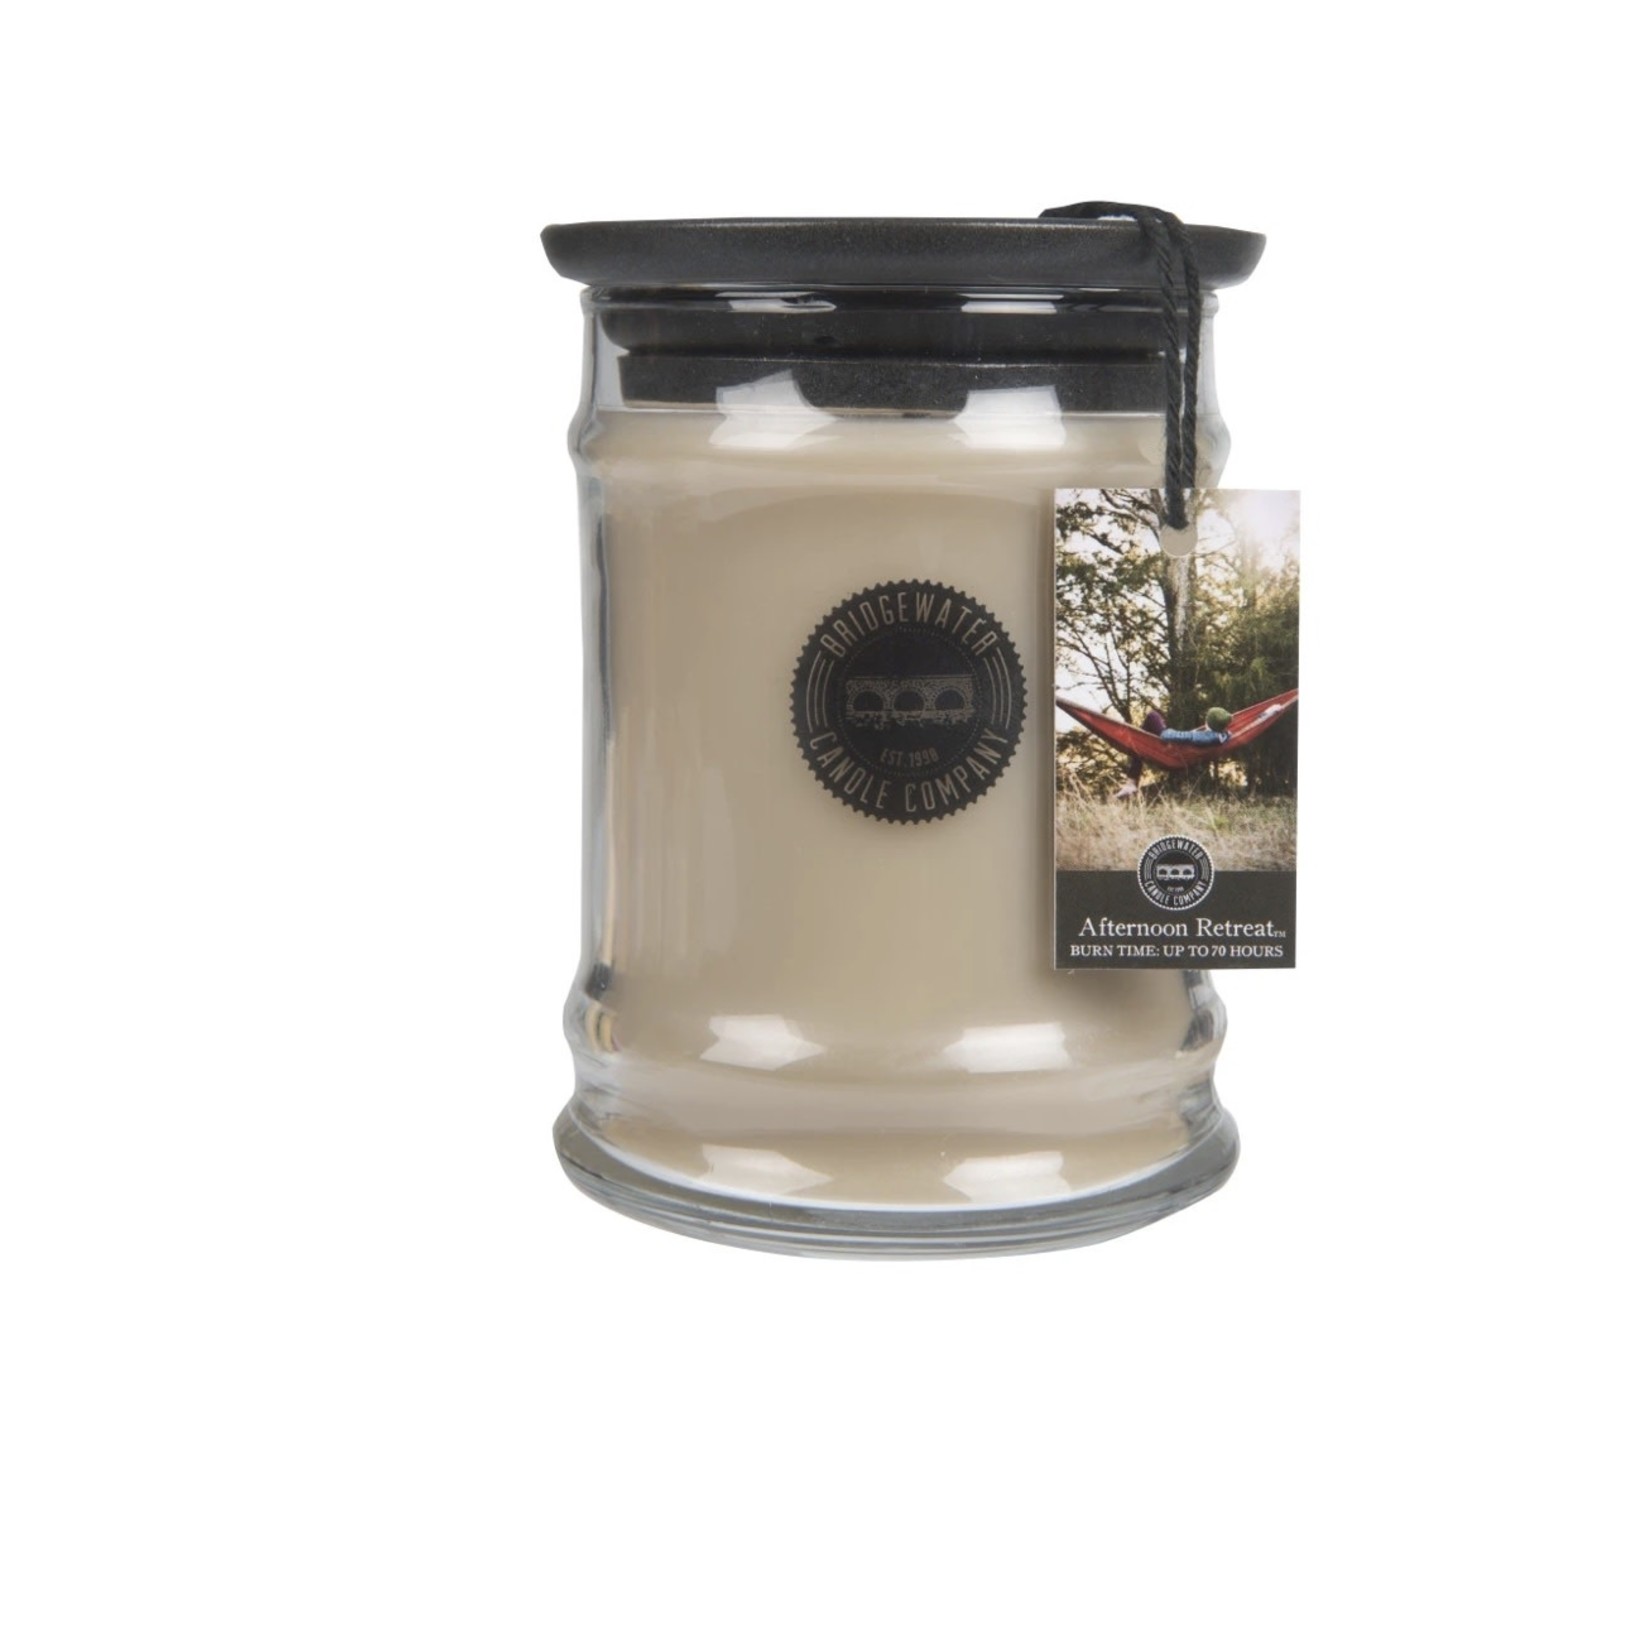 Afternoon Retreat 8.8oz Candle